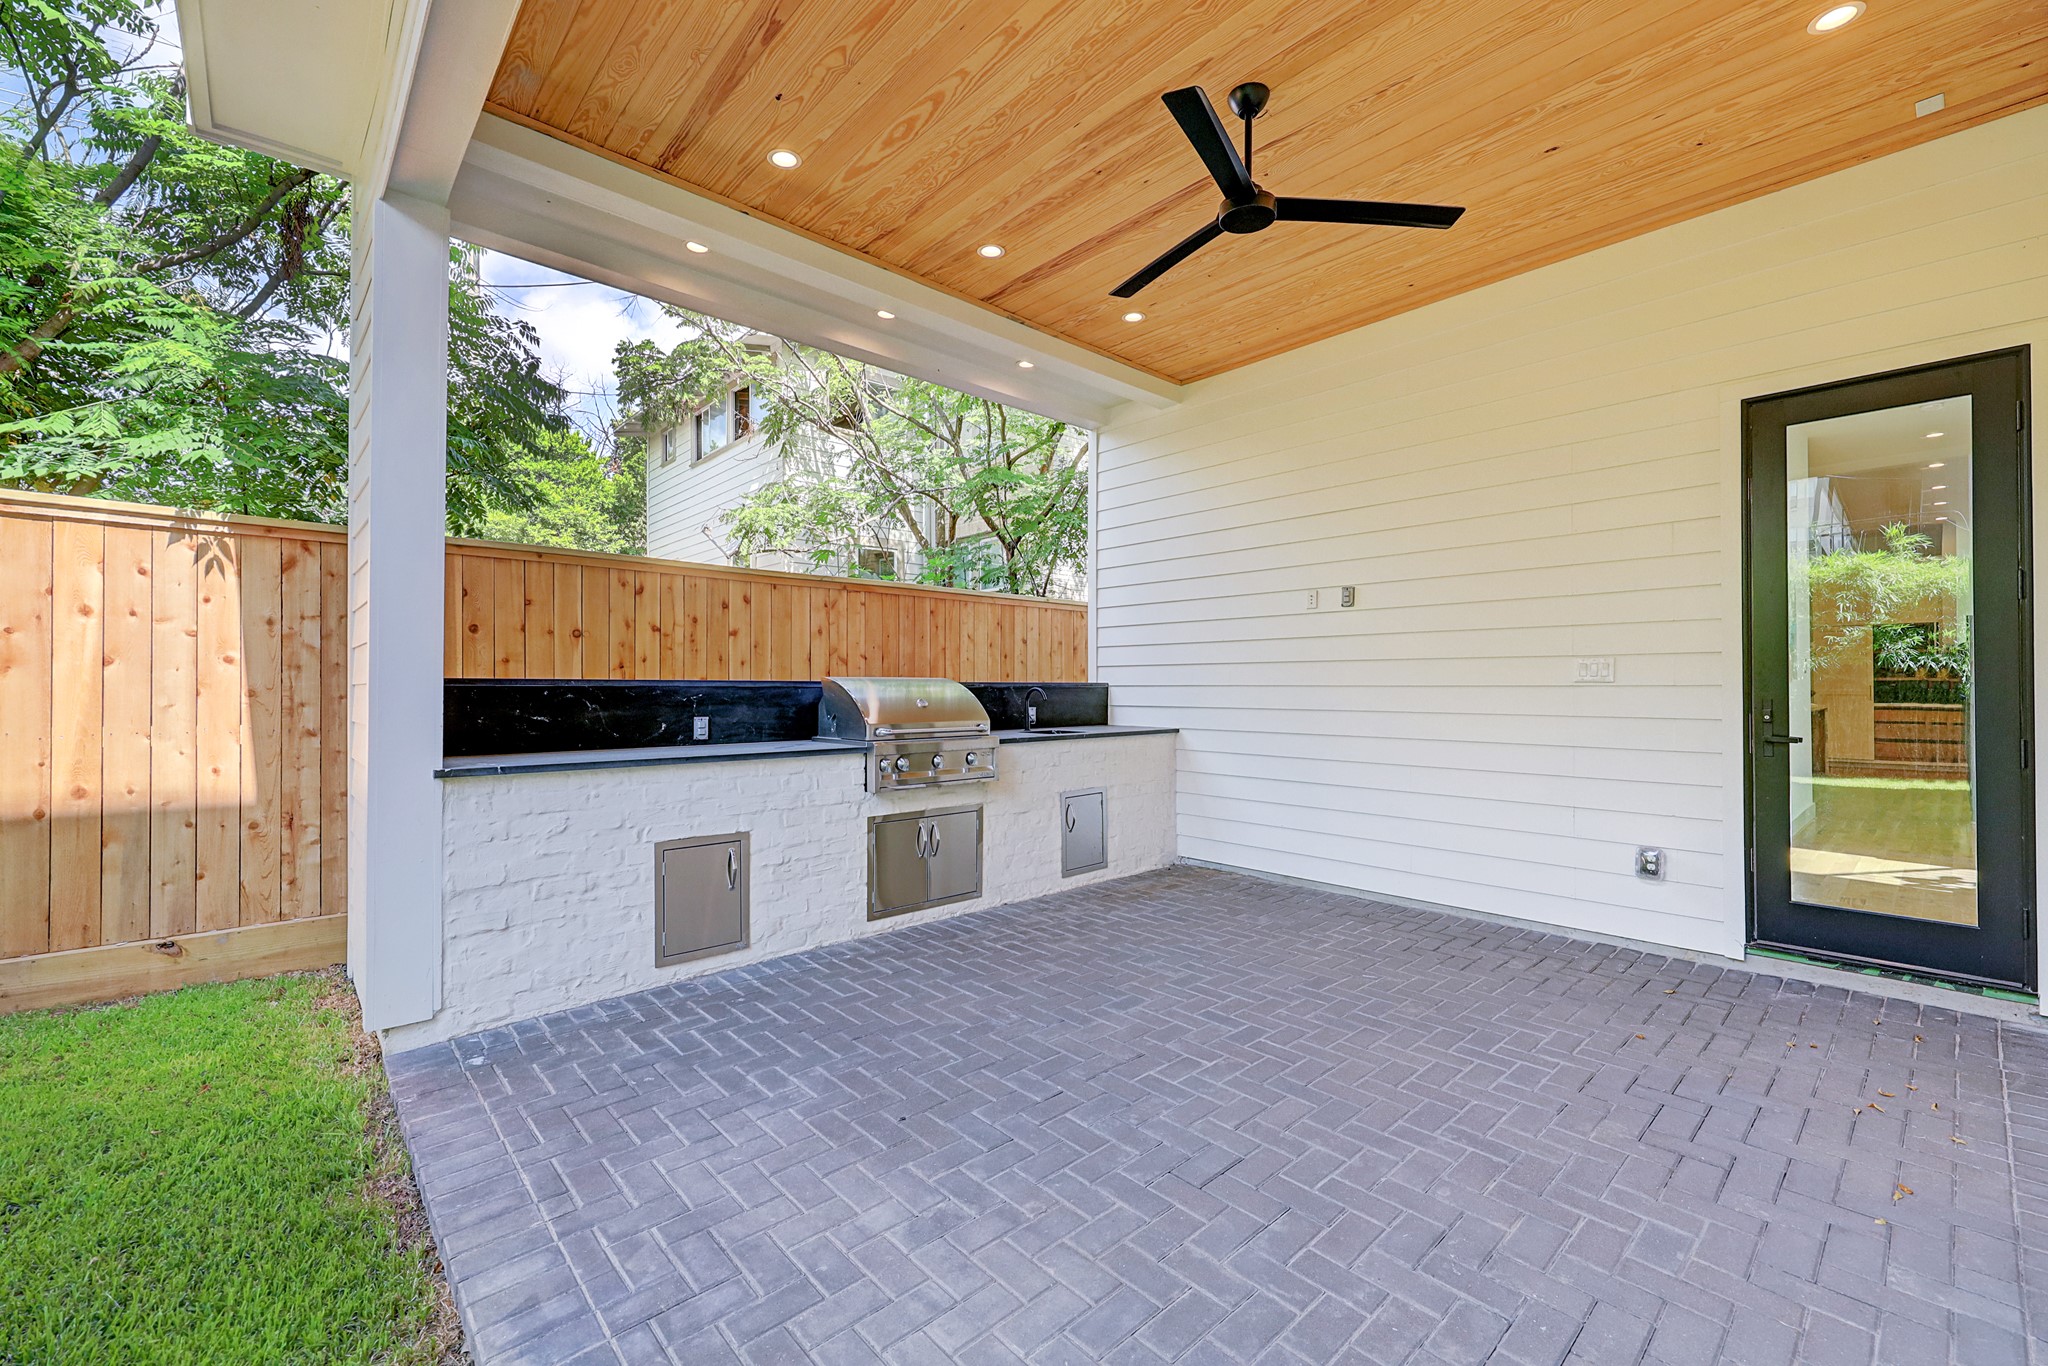 Covered outdoor kitchen with grill & pool-sized backyard with bamboo landscape for privacy